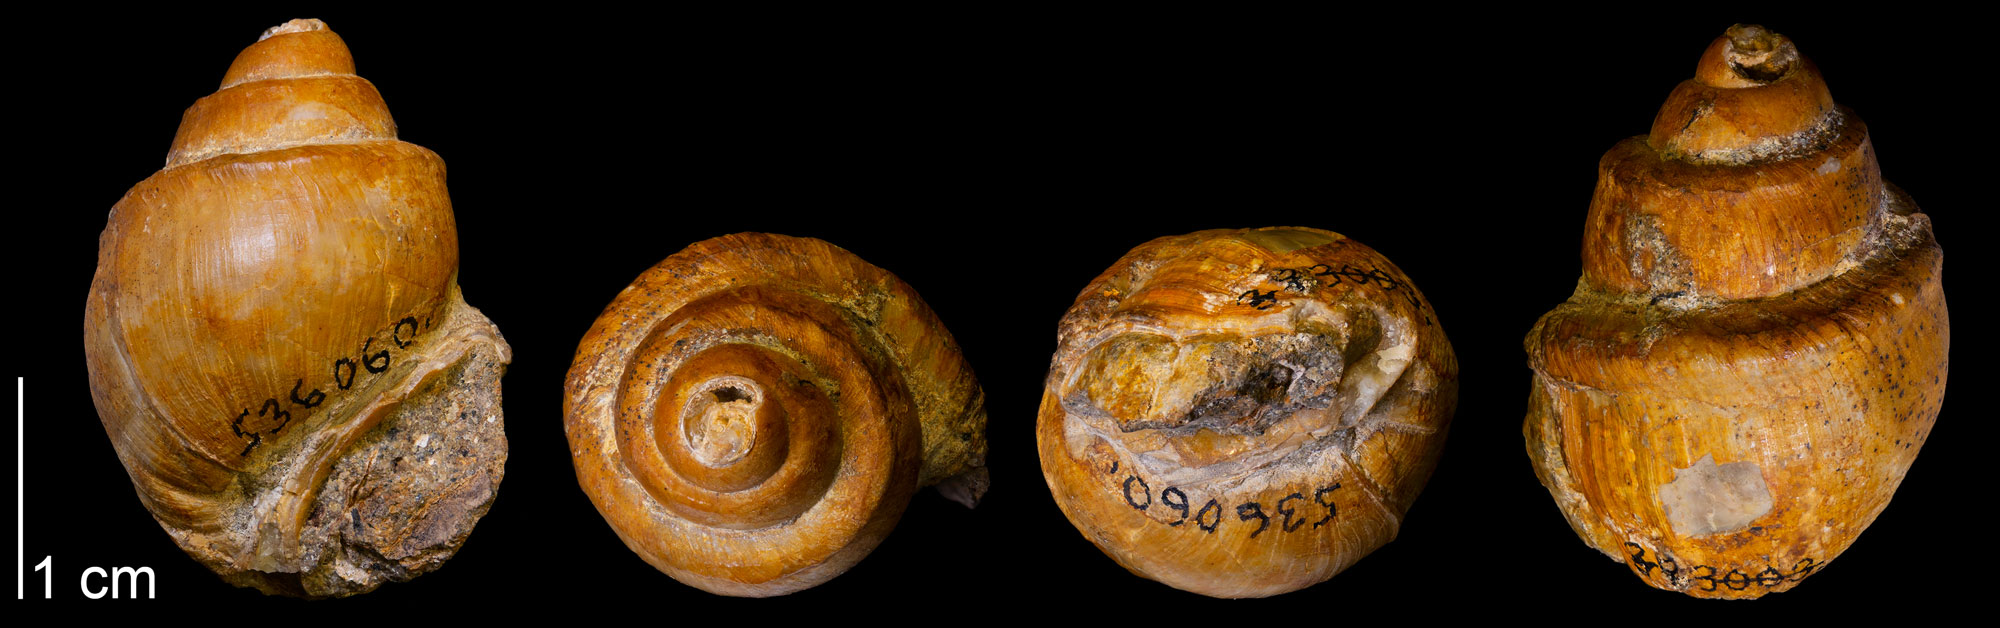 Photograph of a fossil snail shell from the Cretaceous of Wyoming. The photo shows the shell in four views, one from the side showing the aperture, one from the top, one from the bottom, and one from the back. The shell is roughly ovate in lateral view is deep ridges in the turns of the spire. The shell is orange in color and relatively smooth.